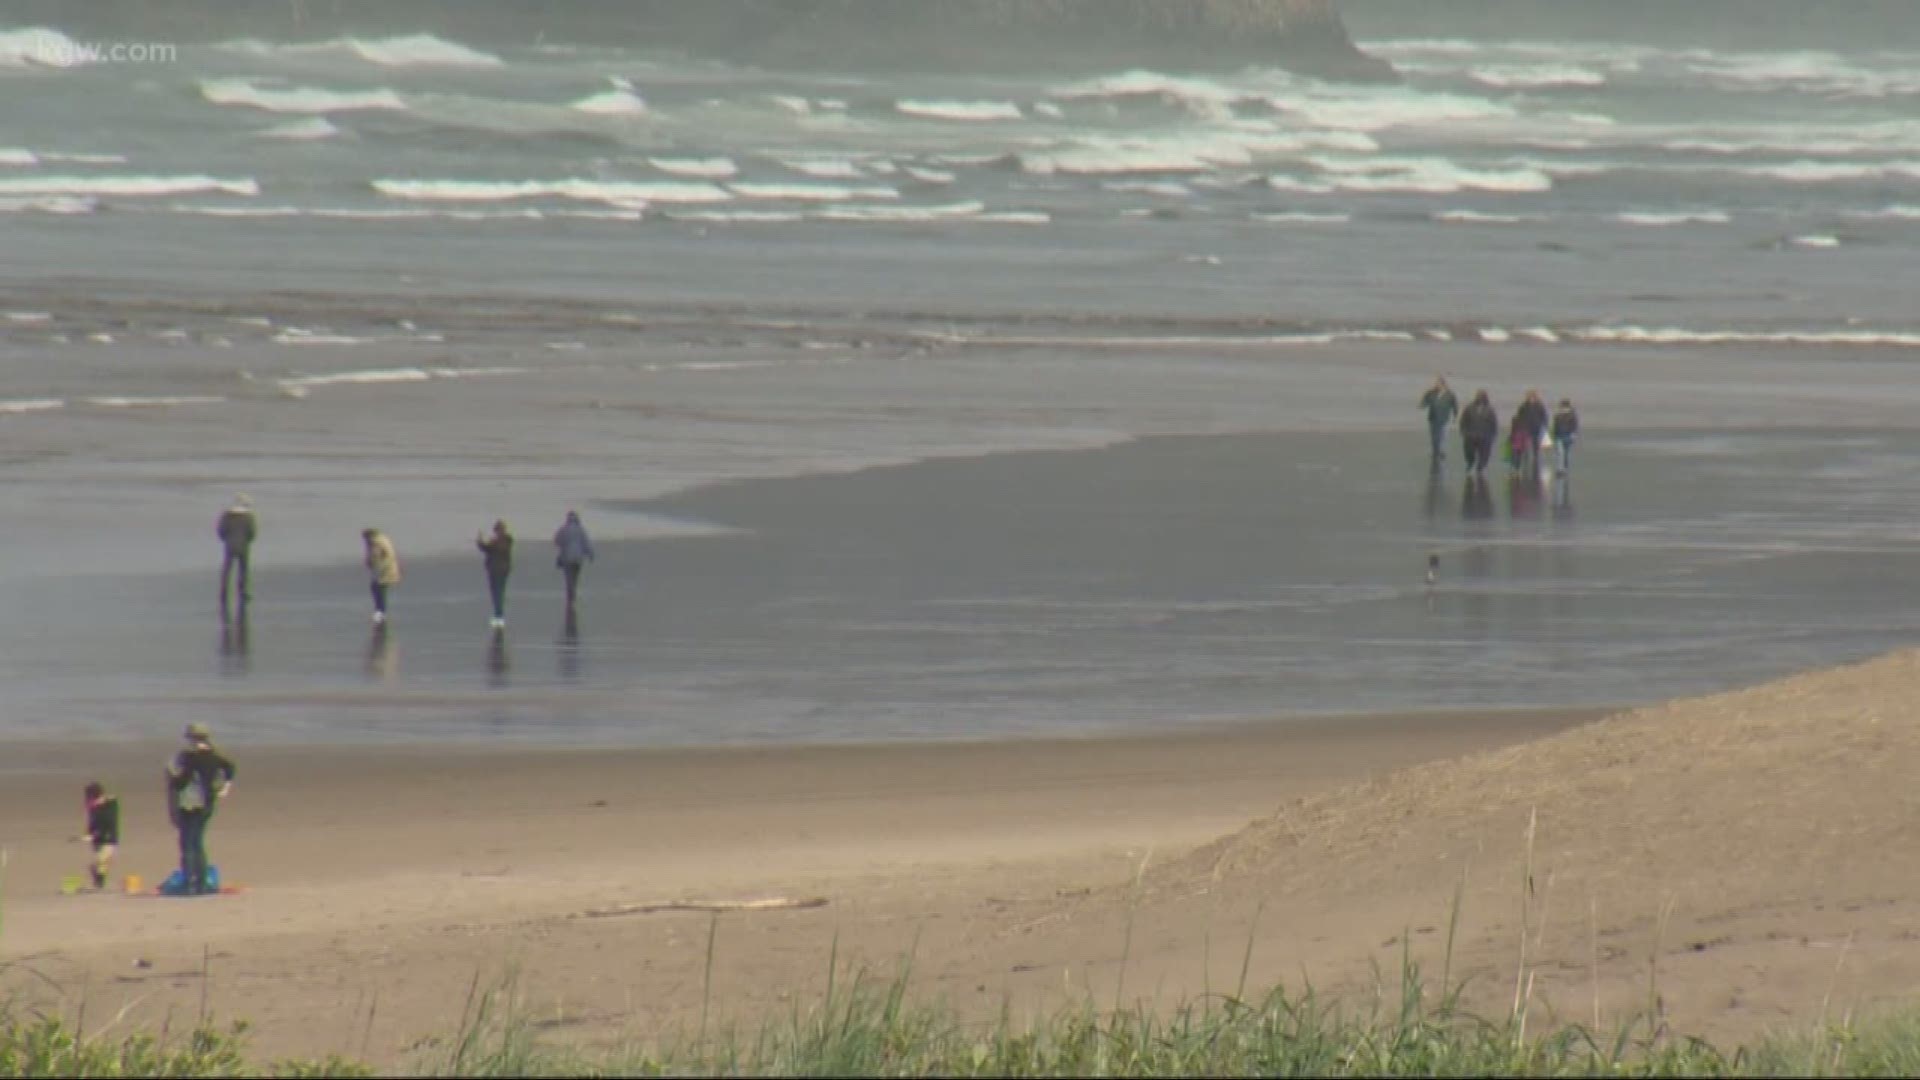 Reactions to the offshore drilling proposal along the west coast.